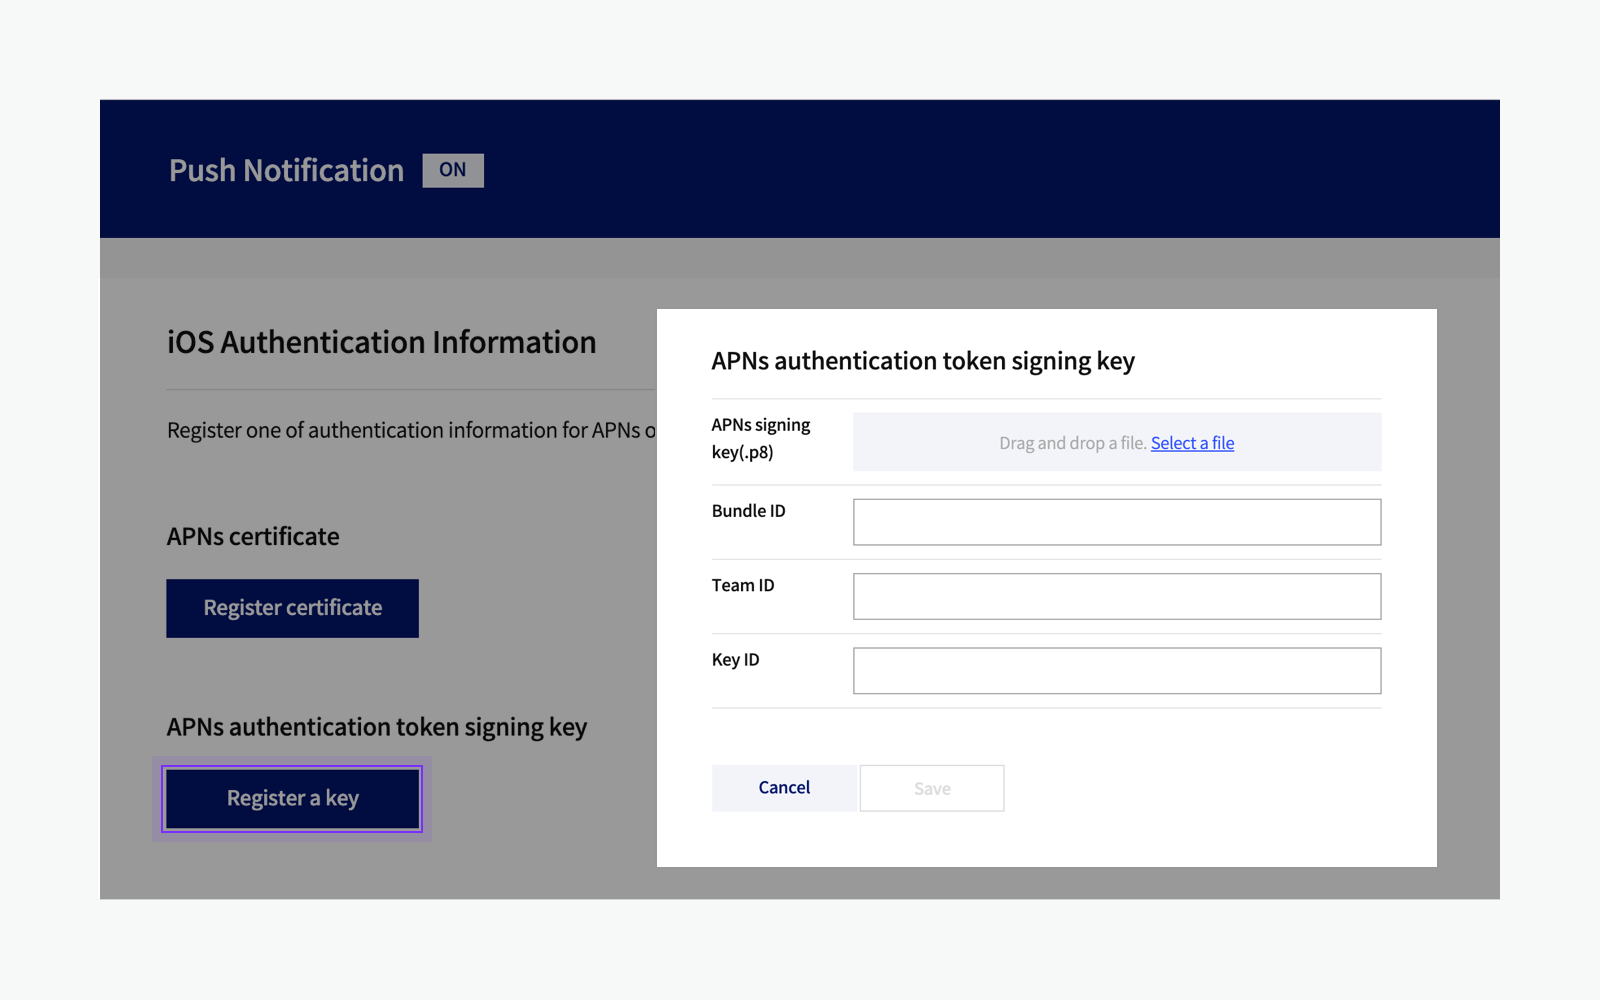 How to register APNs authentication token signing key